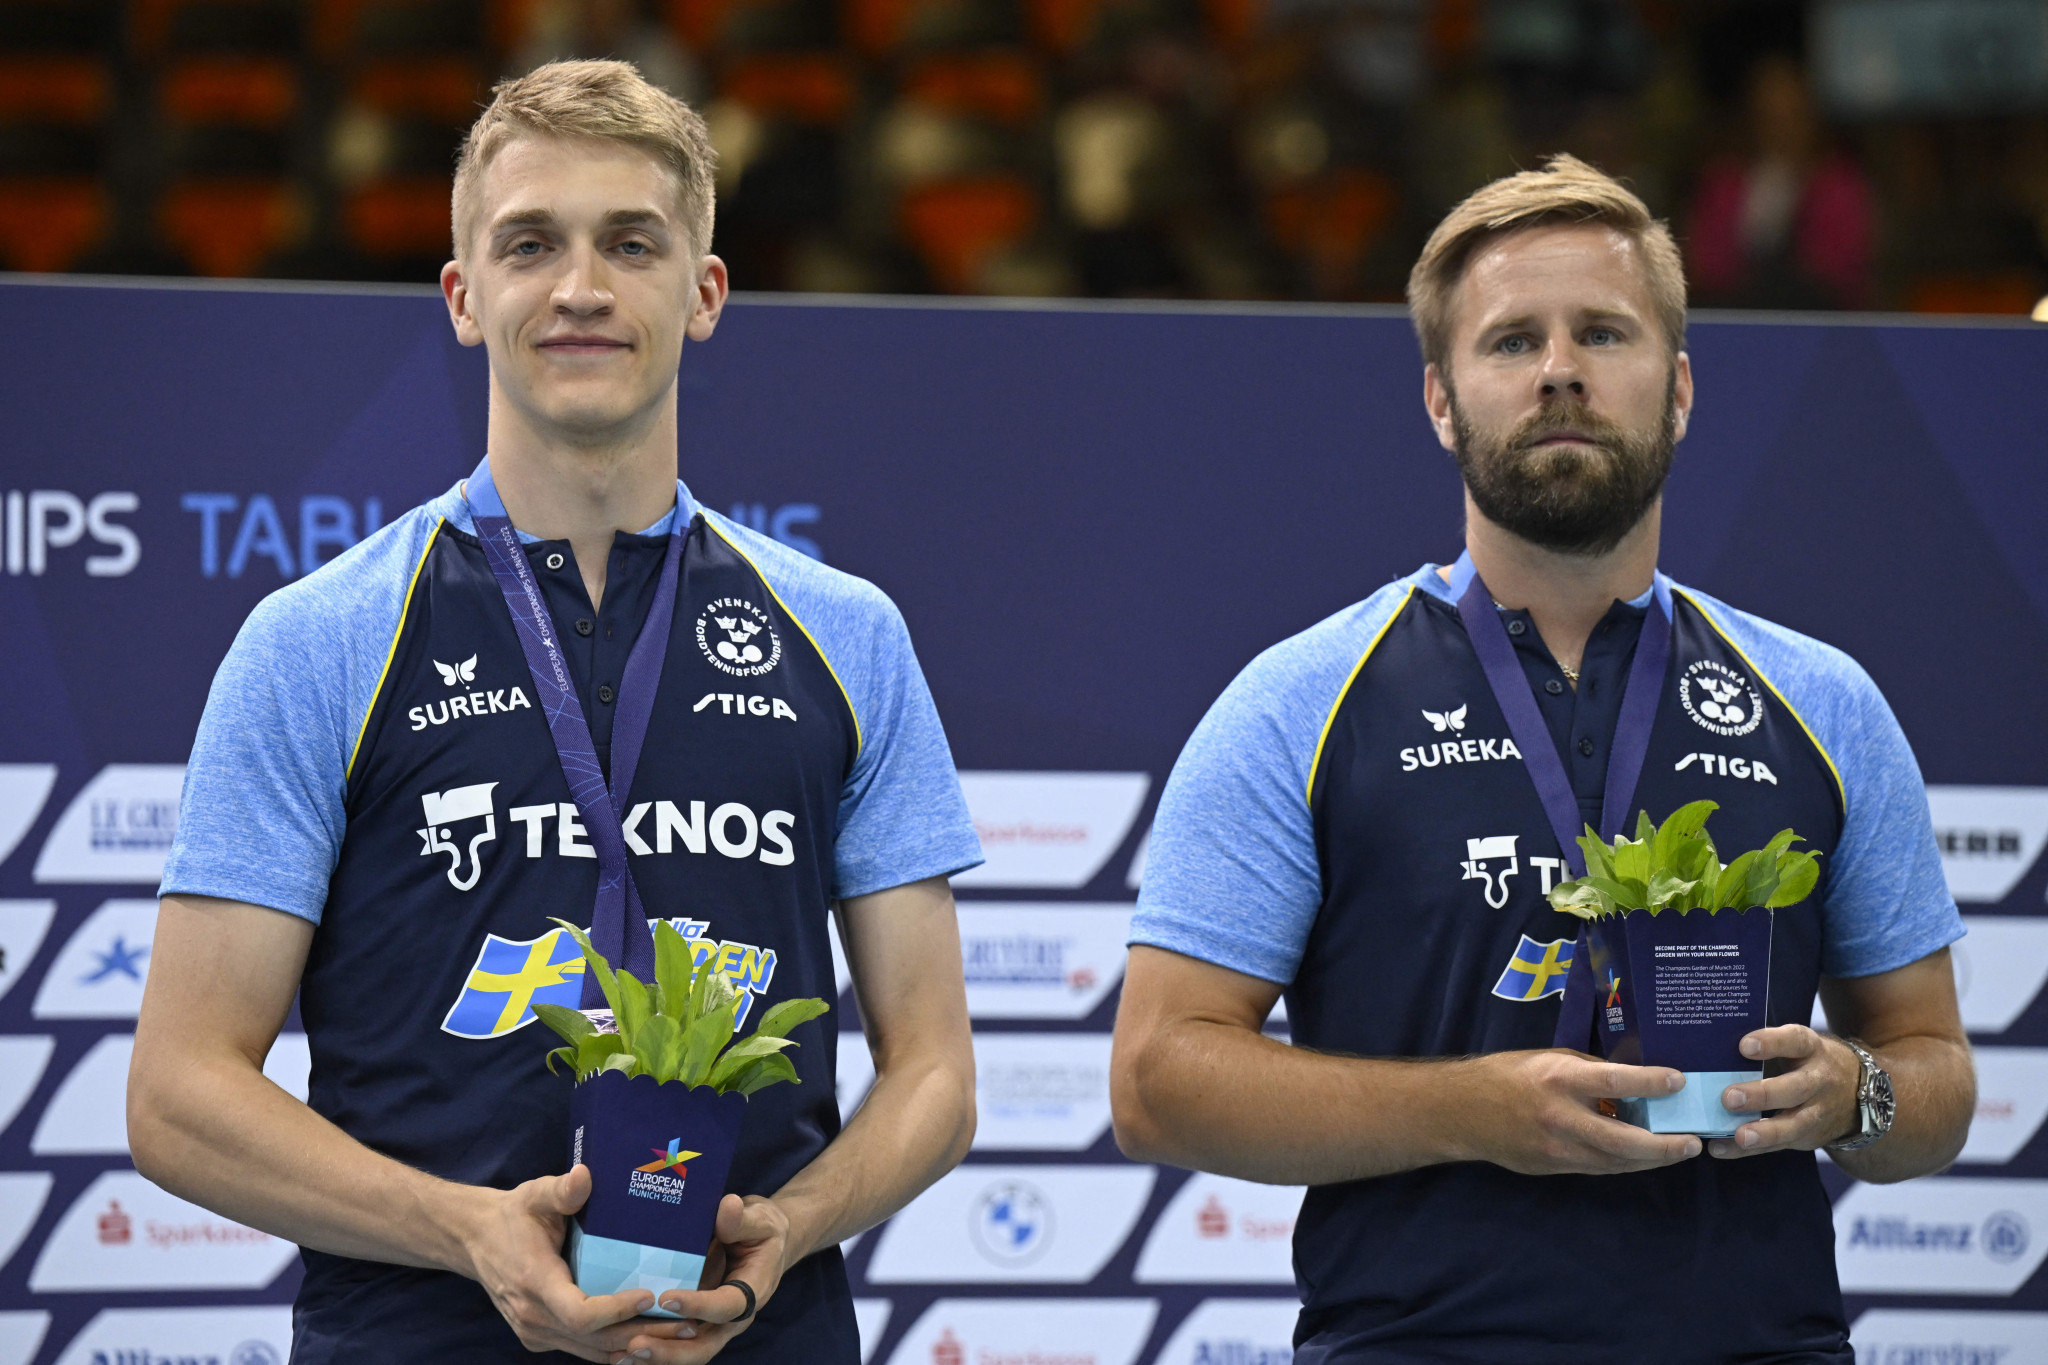 Jon Persson, right, is out of the World Team Table Tennis Championships after testing positive for COVID-19 ©Getty Images